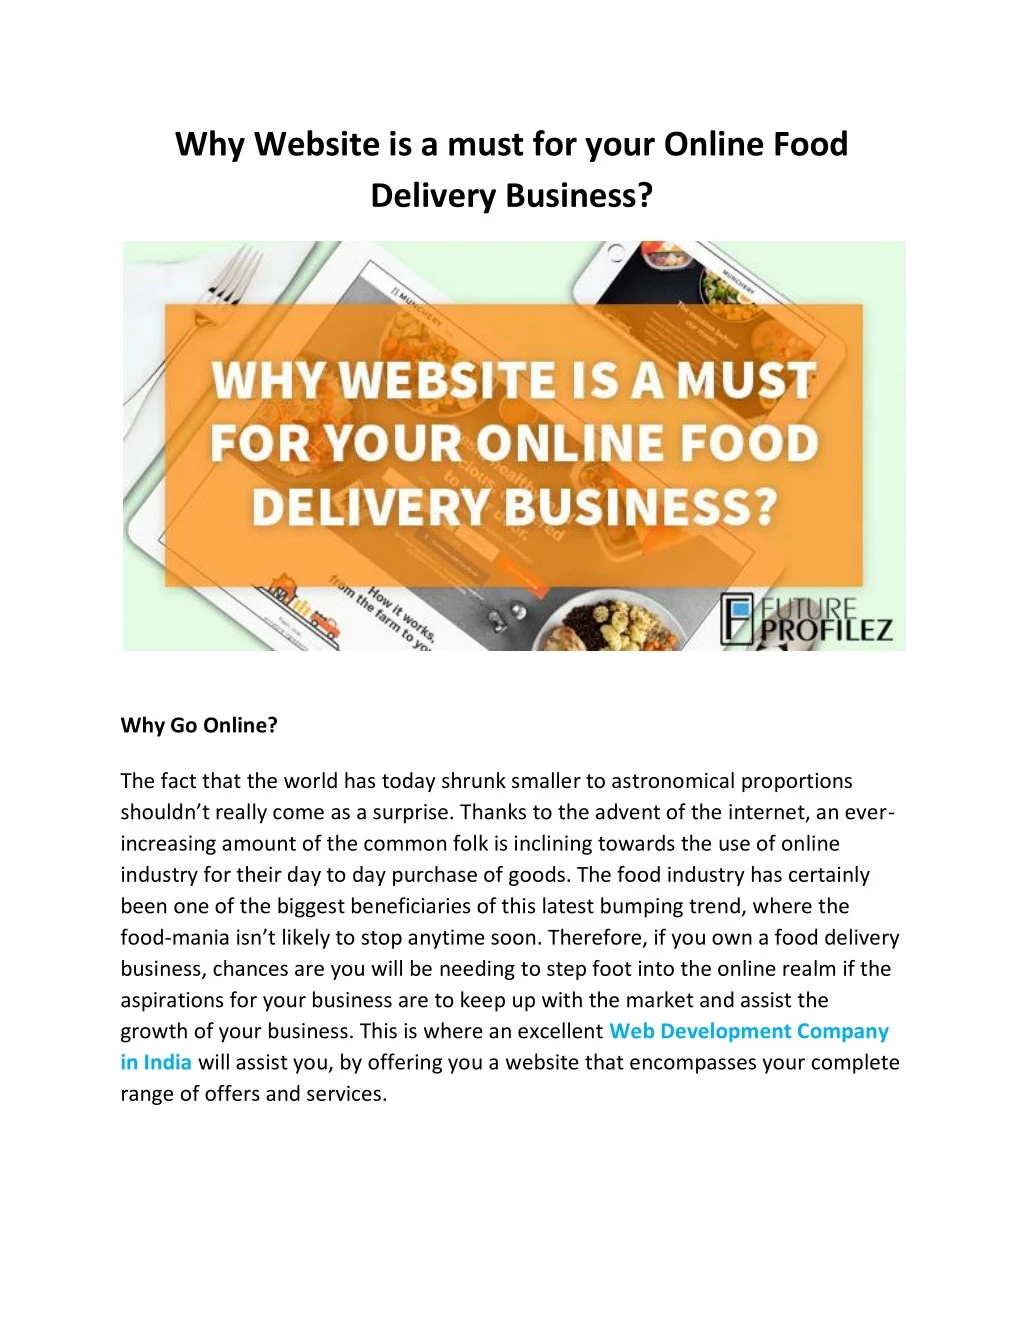 why website is a must for your online food